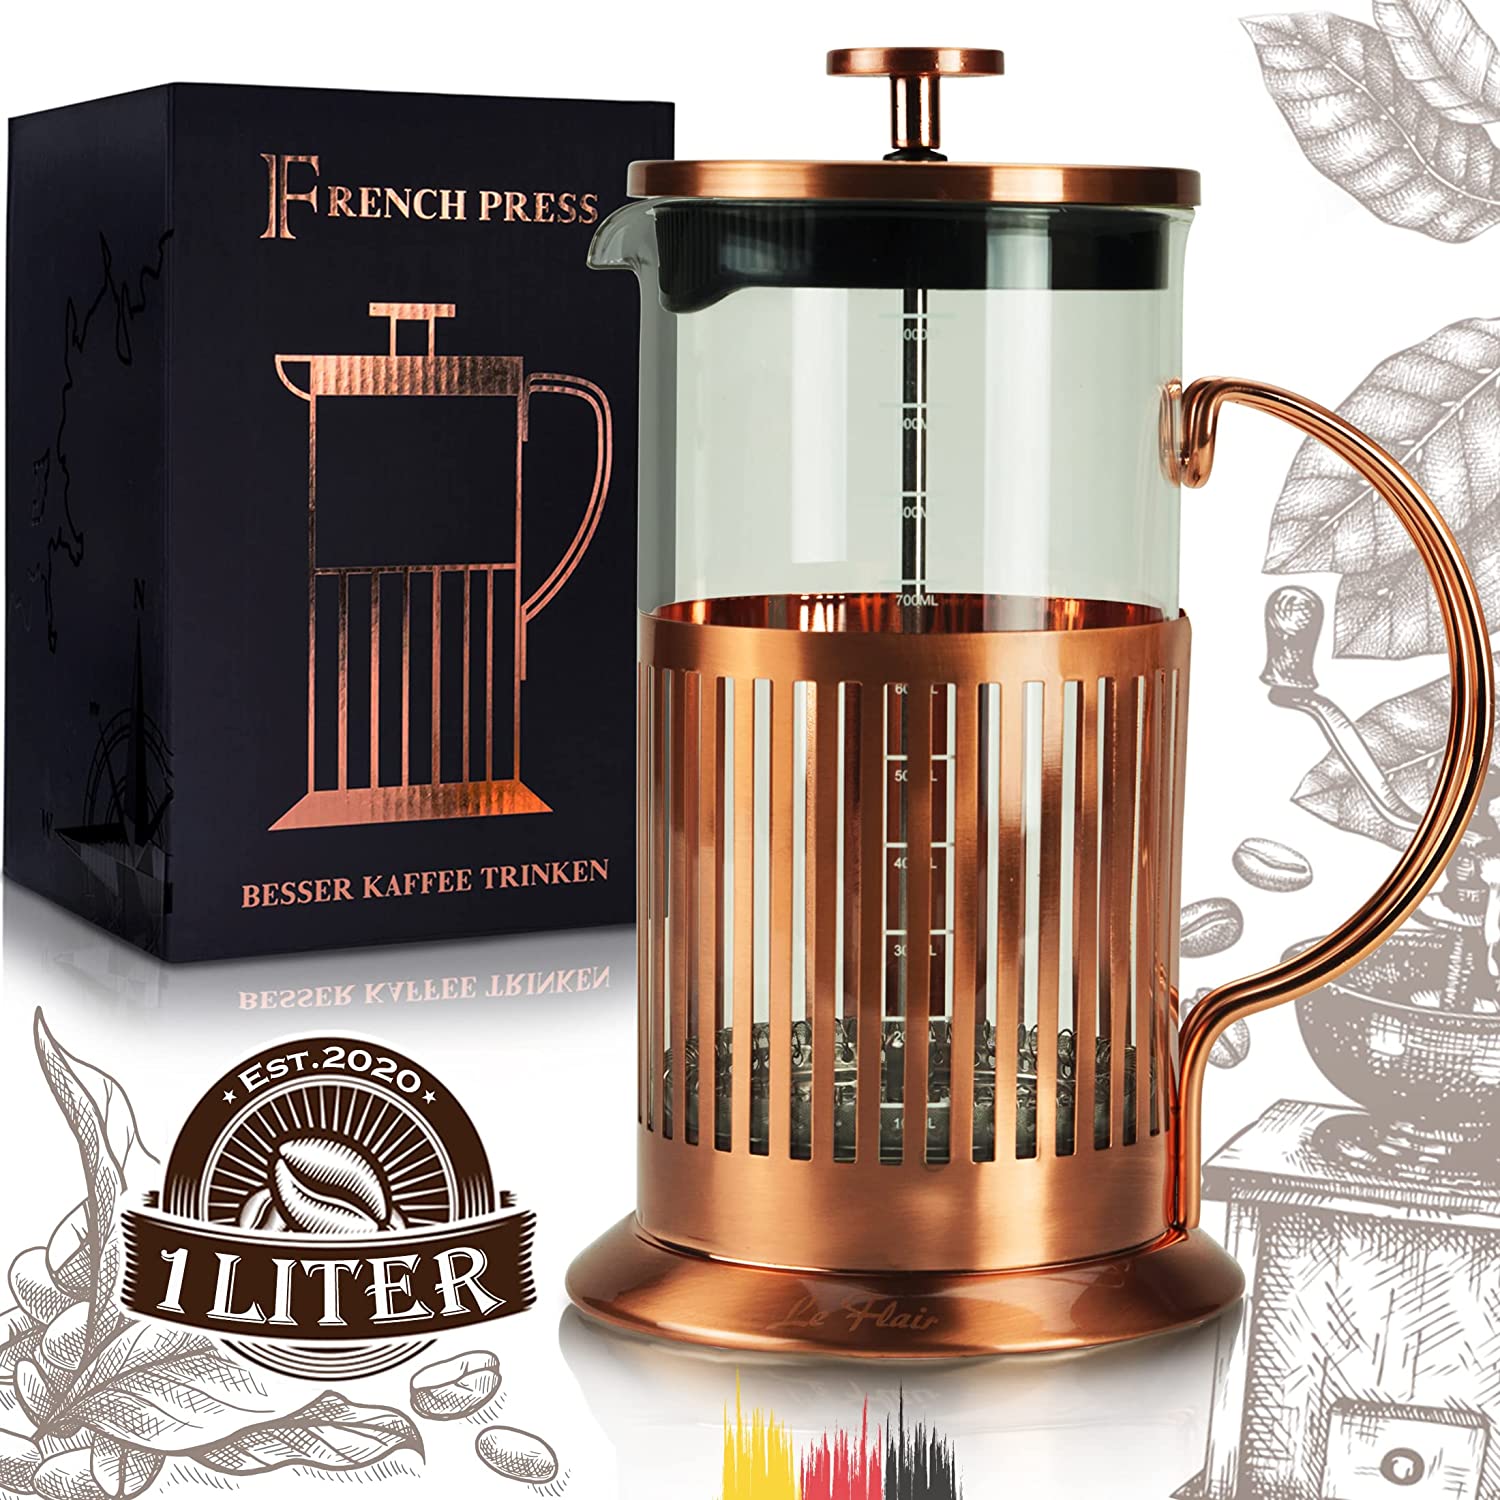 Le Flair® French Press for 1 Litre Coffee - Tea Press Jug Made of Glass with Copper Coating - Coffee Maker including Copper Design Packaging – Press Coffee Maker